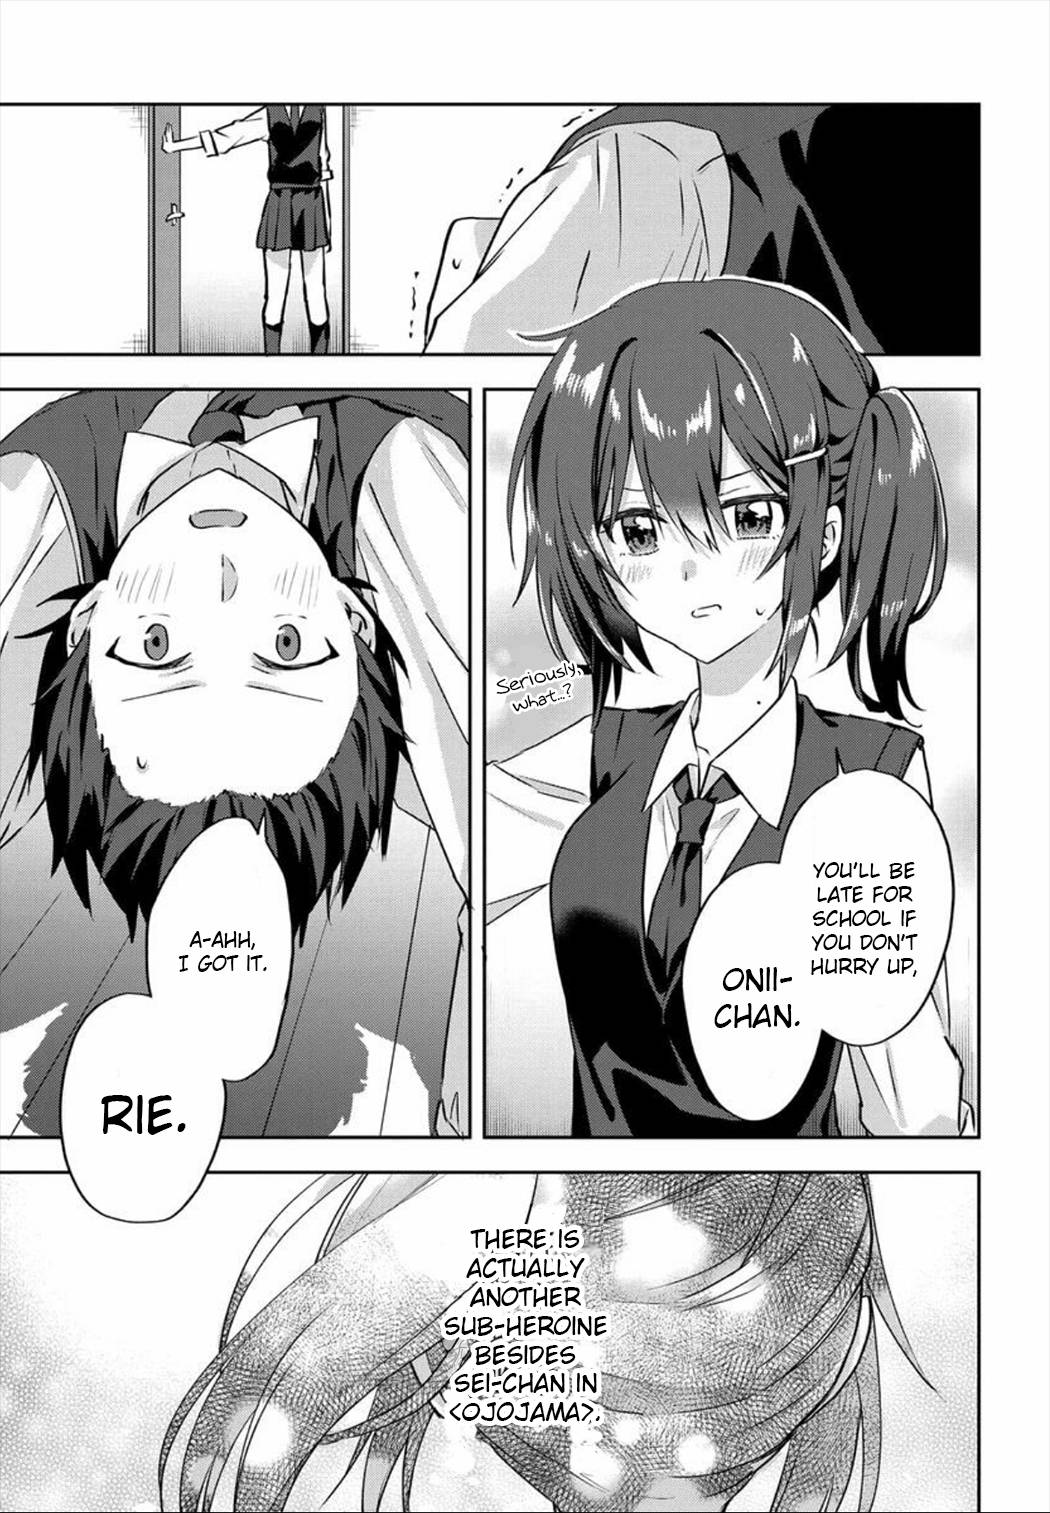 Since I’Ve Entered The World Of Romantic Comedy Manga, I’Ll Do My Best To Make The Losing Heroine Happy - chapter 2.2 - #6